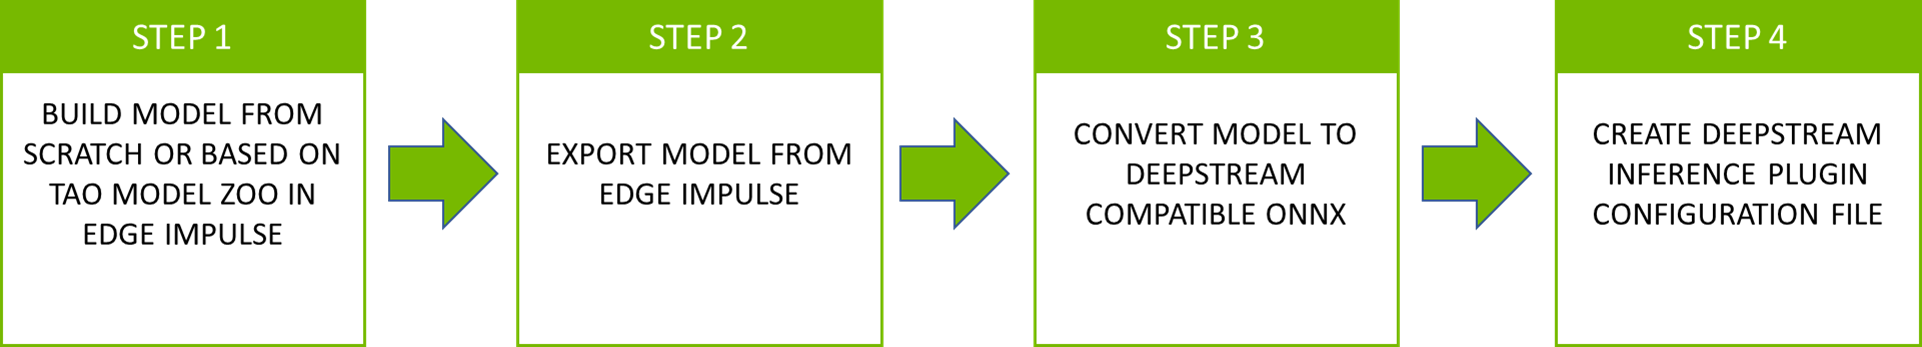 Diagram of four steps for deploying model files from Edge Impulse into NVIDIA DeepStream. Step 1: Build model in Edge Impulse. Step 2: Export model from Edge Impulse. Step 3: Convert model to DeepStream compatible ONNX. Step 4: Create inference plugin configuration file.
